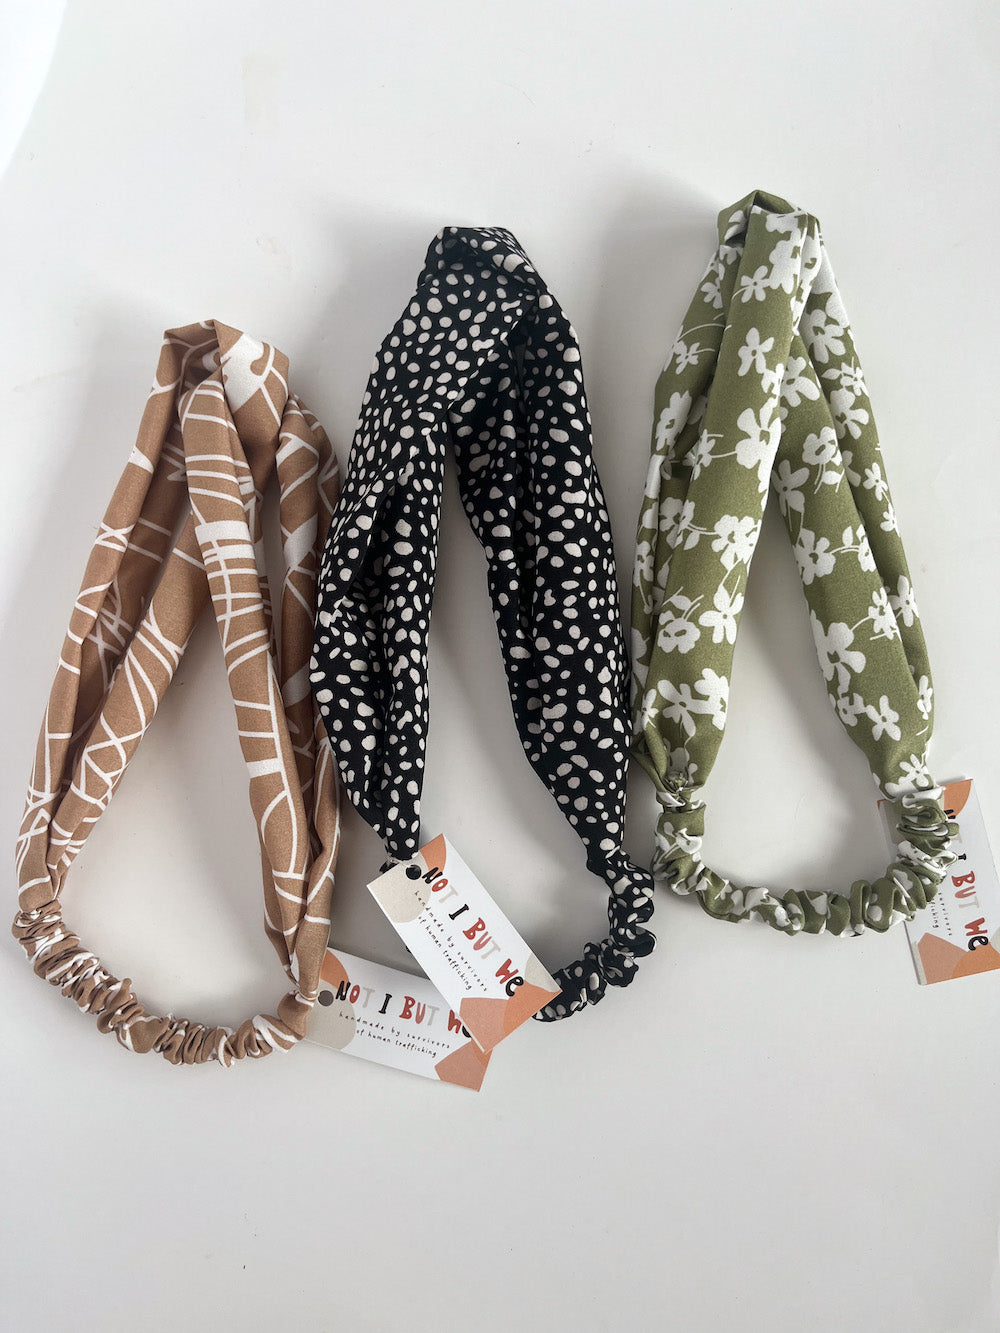 
                  
                    Printed Headband by 2nd Story Goods
                  
                